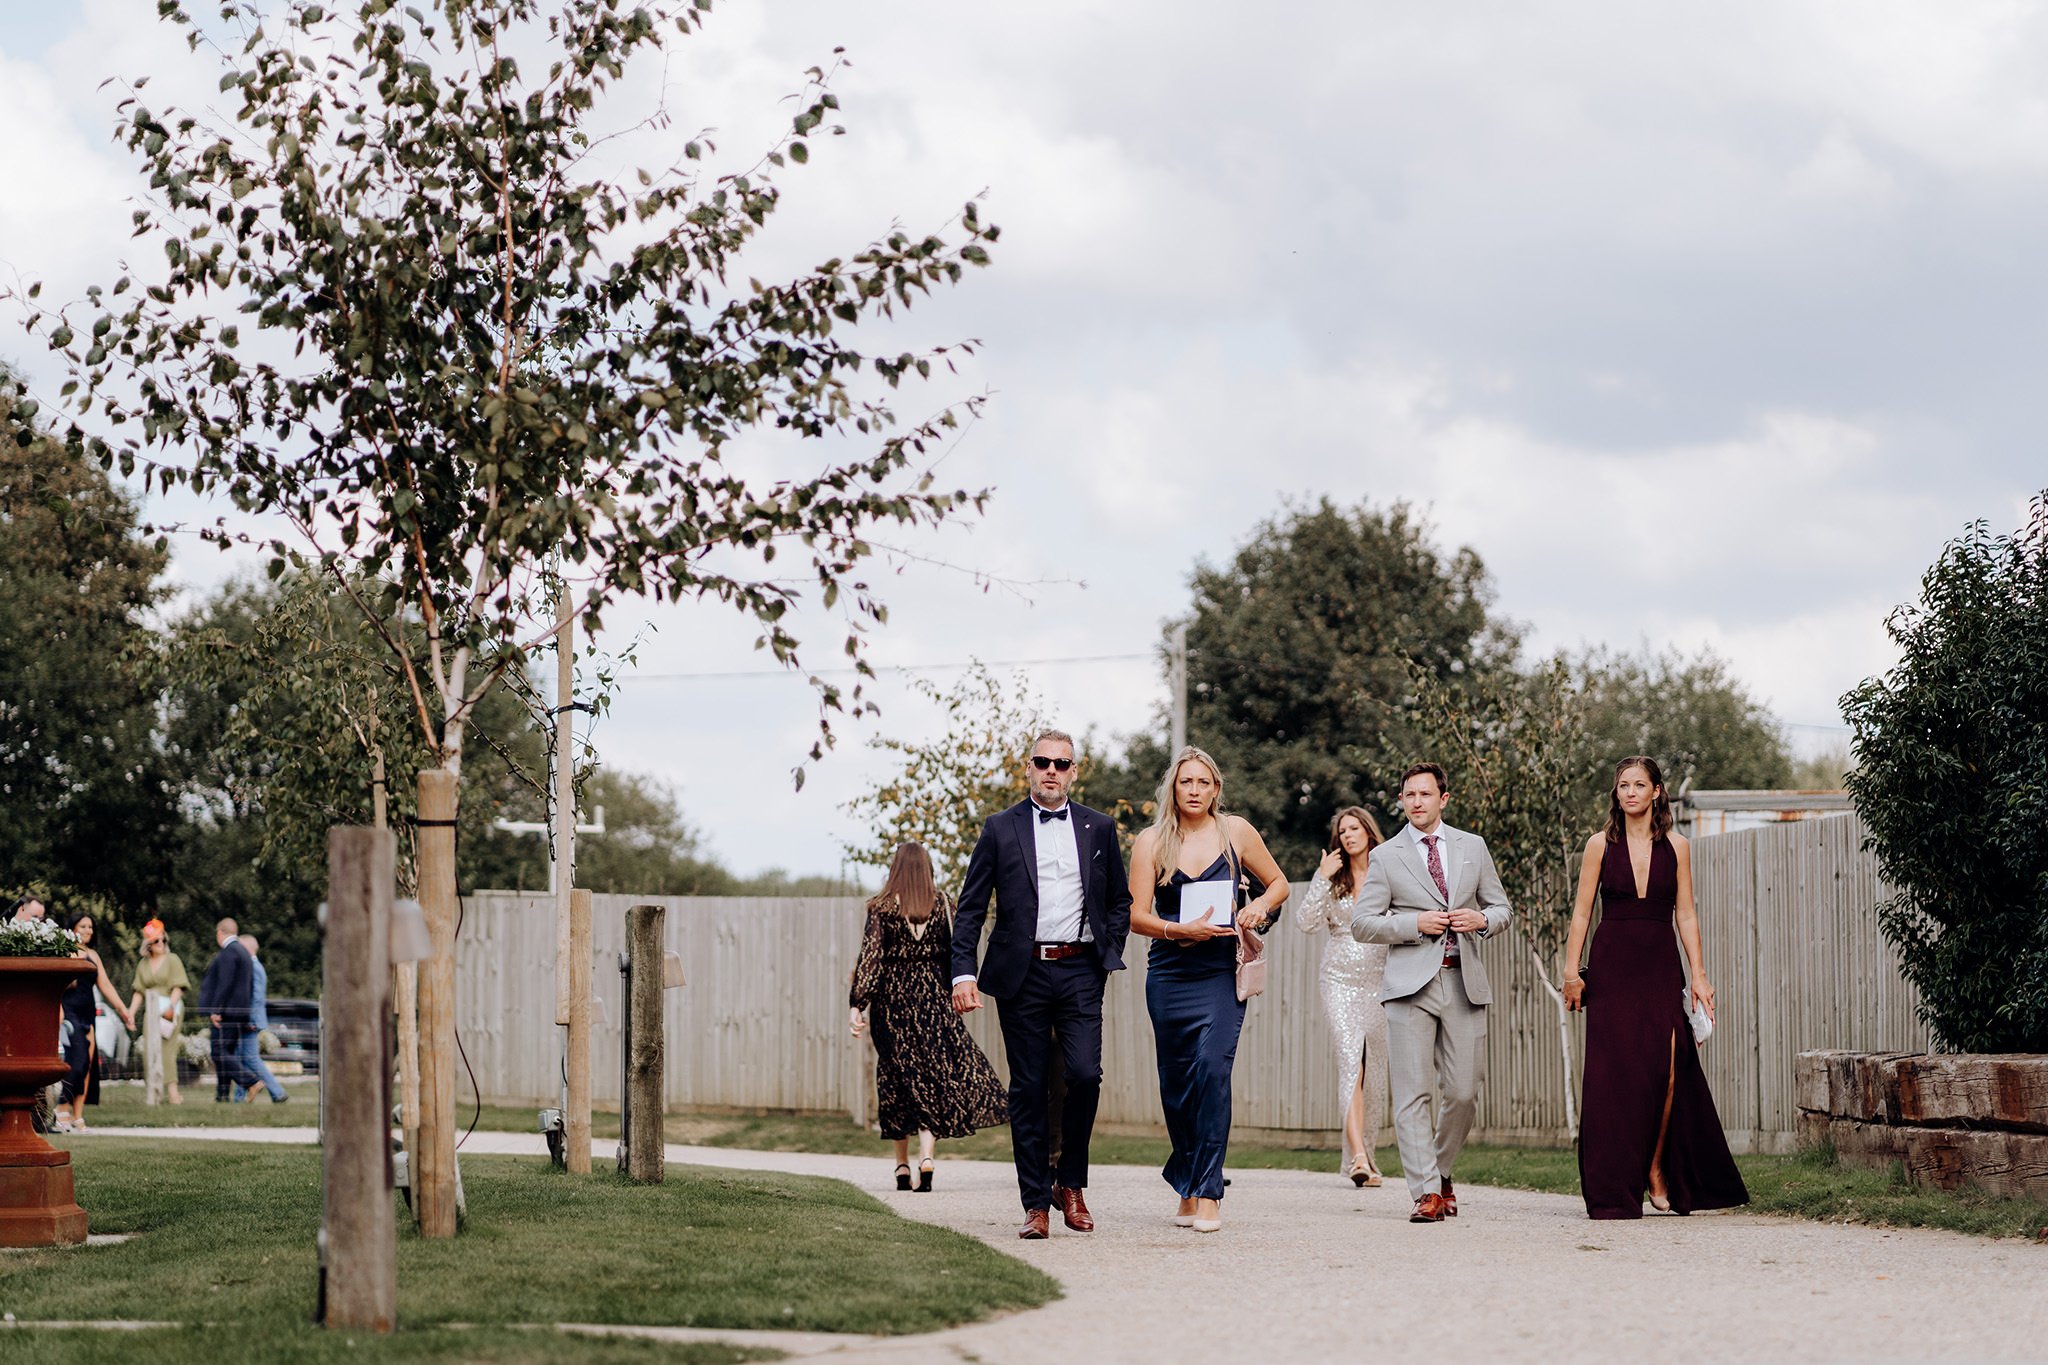 Guests making their way to the wedding reception at The Barn at Botley Hill